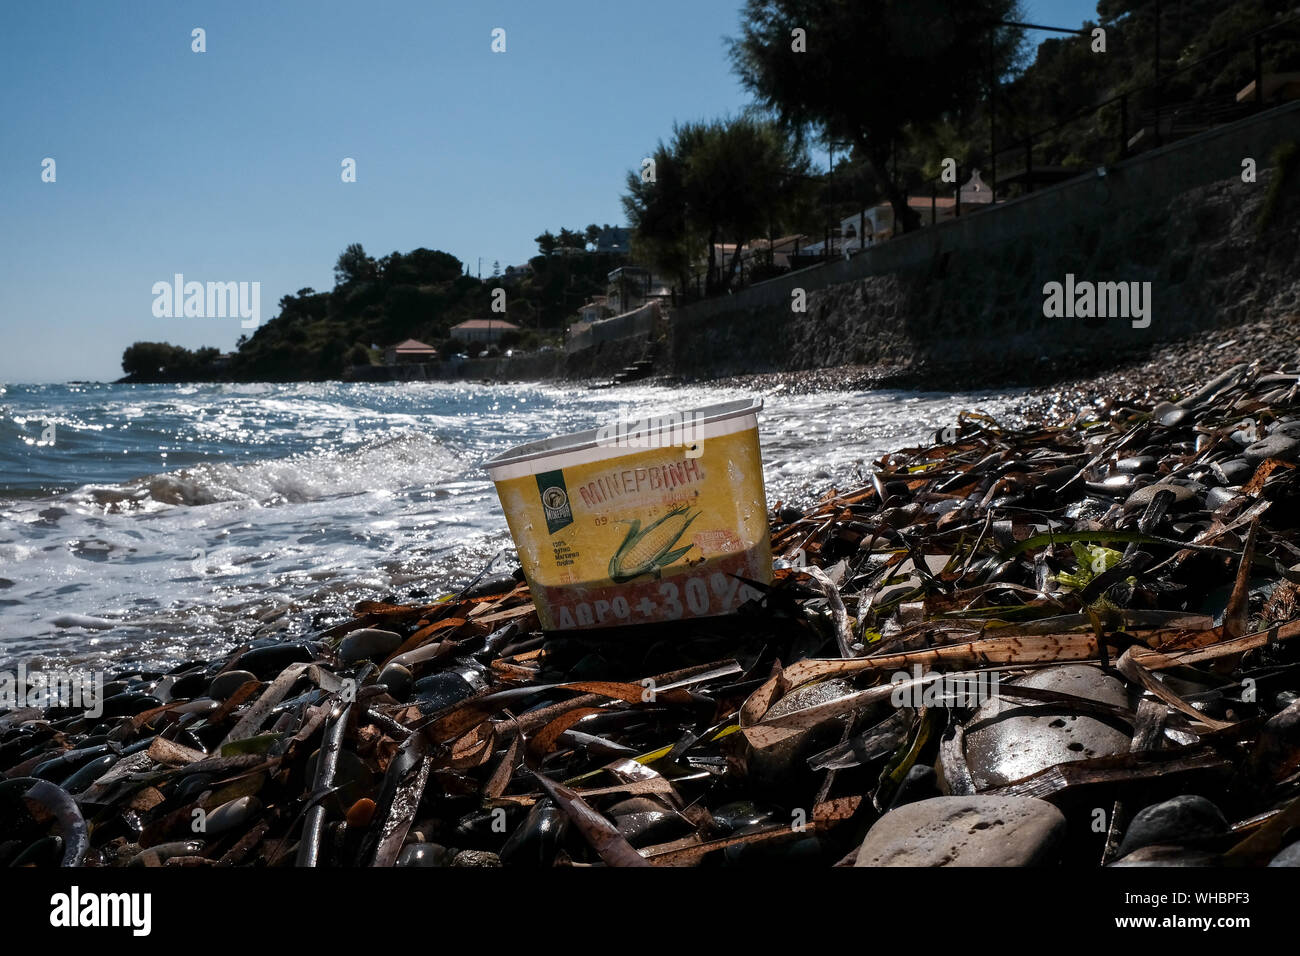 A plastic Sweetcorn container discarded on the beach with water fading and damage adding to the now pollution of the ocean and environment damage. Stock Photo